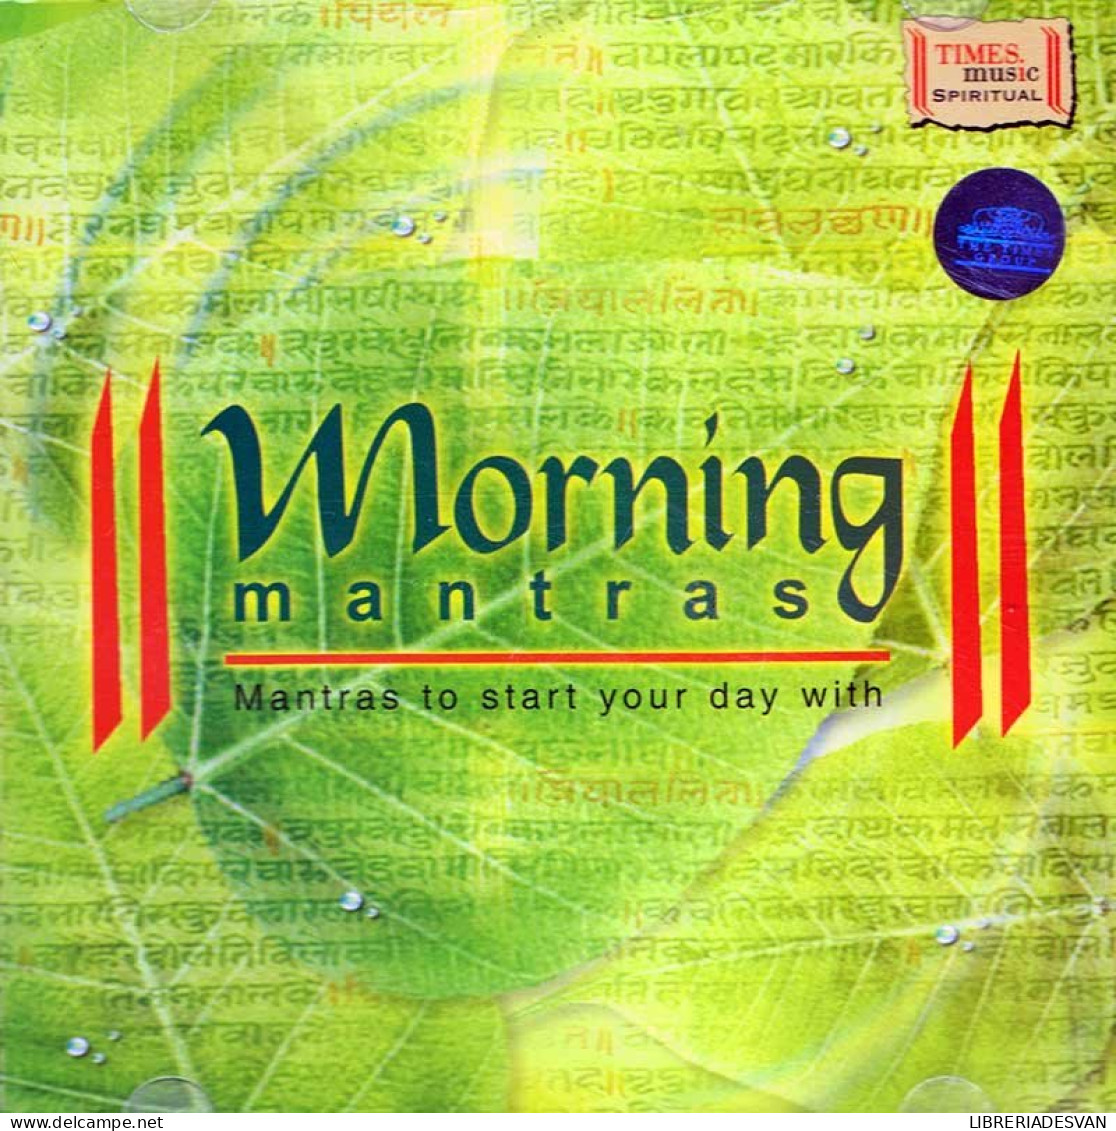 Morning Mantras. CD - New Age